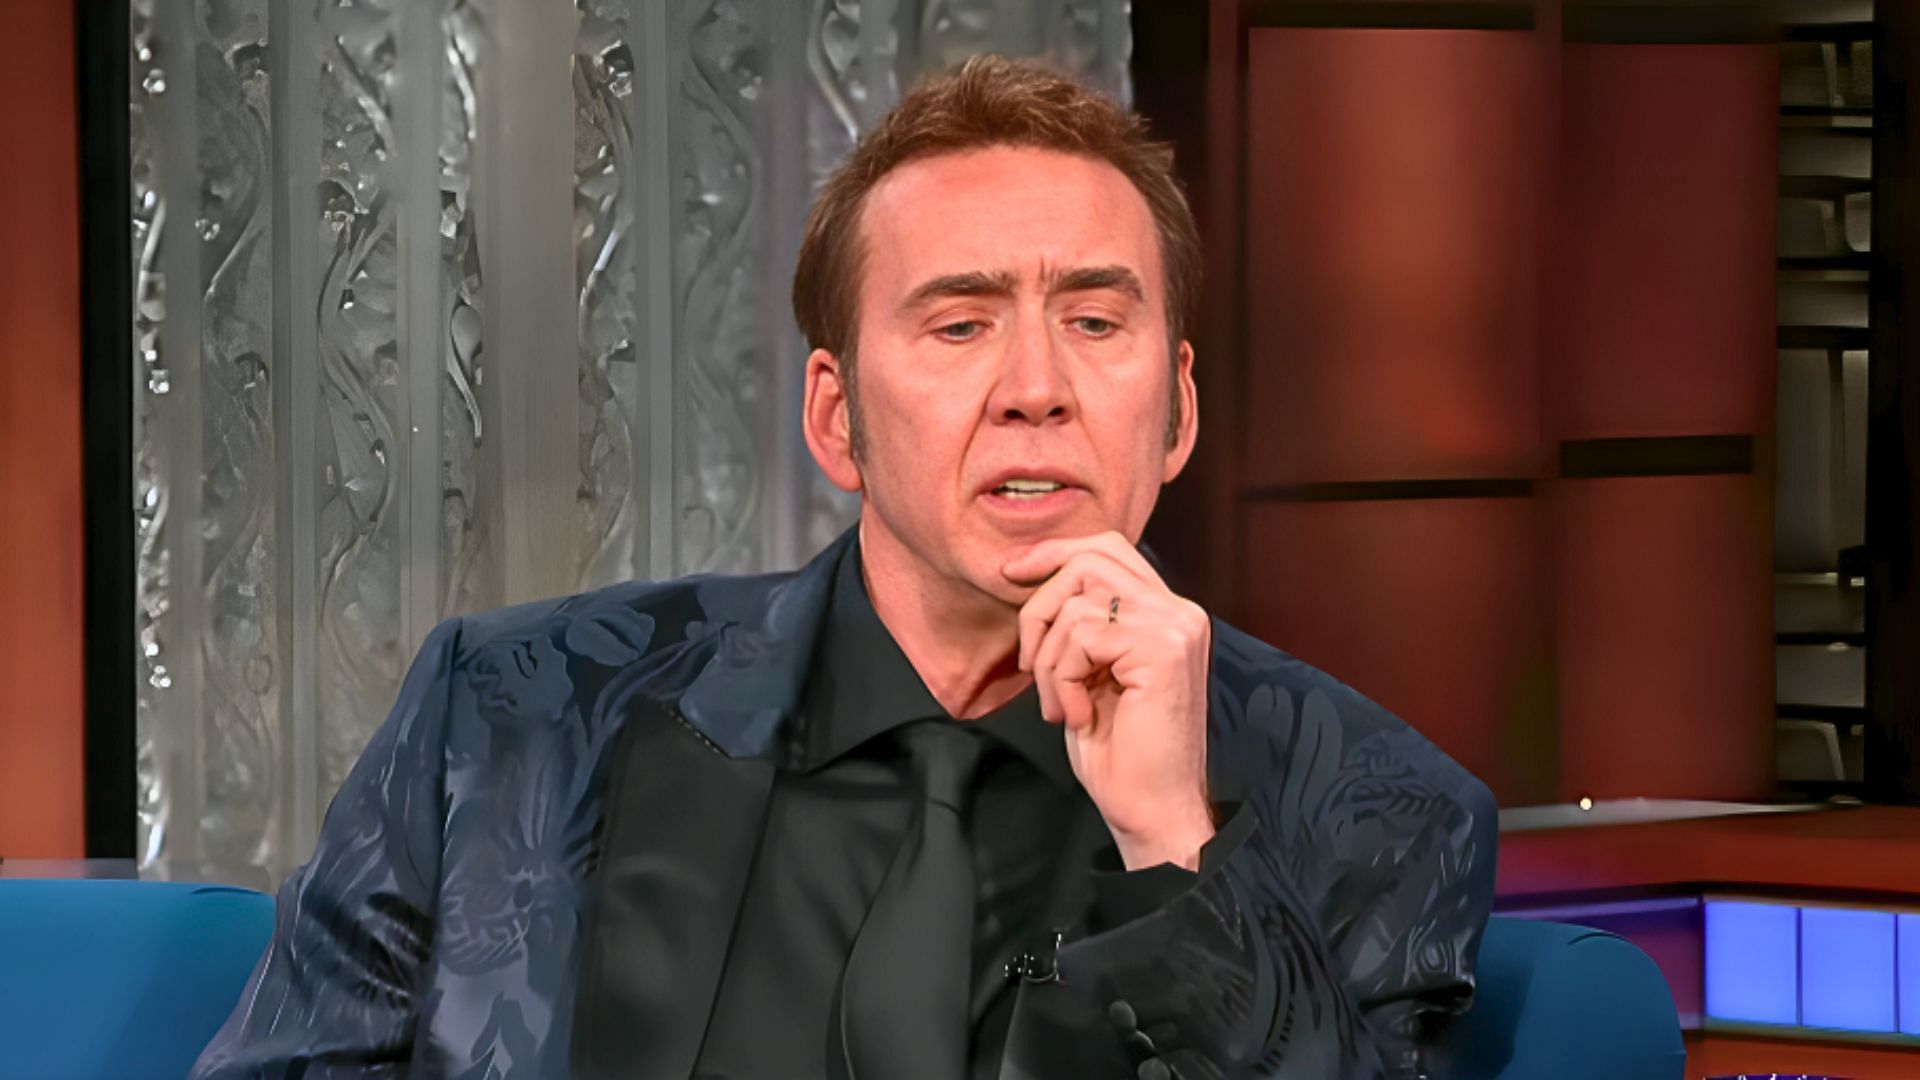 Actor Nicolas Cage attended the Oscars 2024 presented the award for Best Actor (Image via YouTube/The Late Show with Stephen Colbert, 2:53)